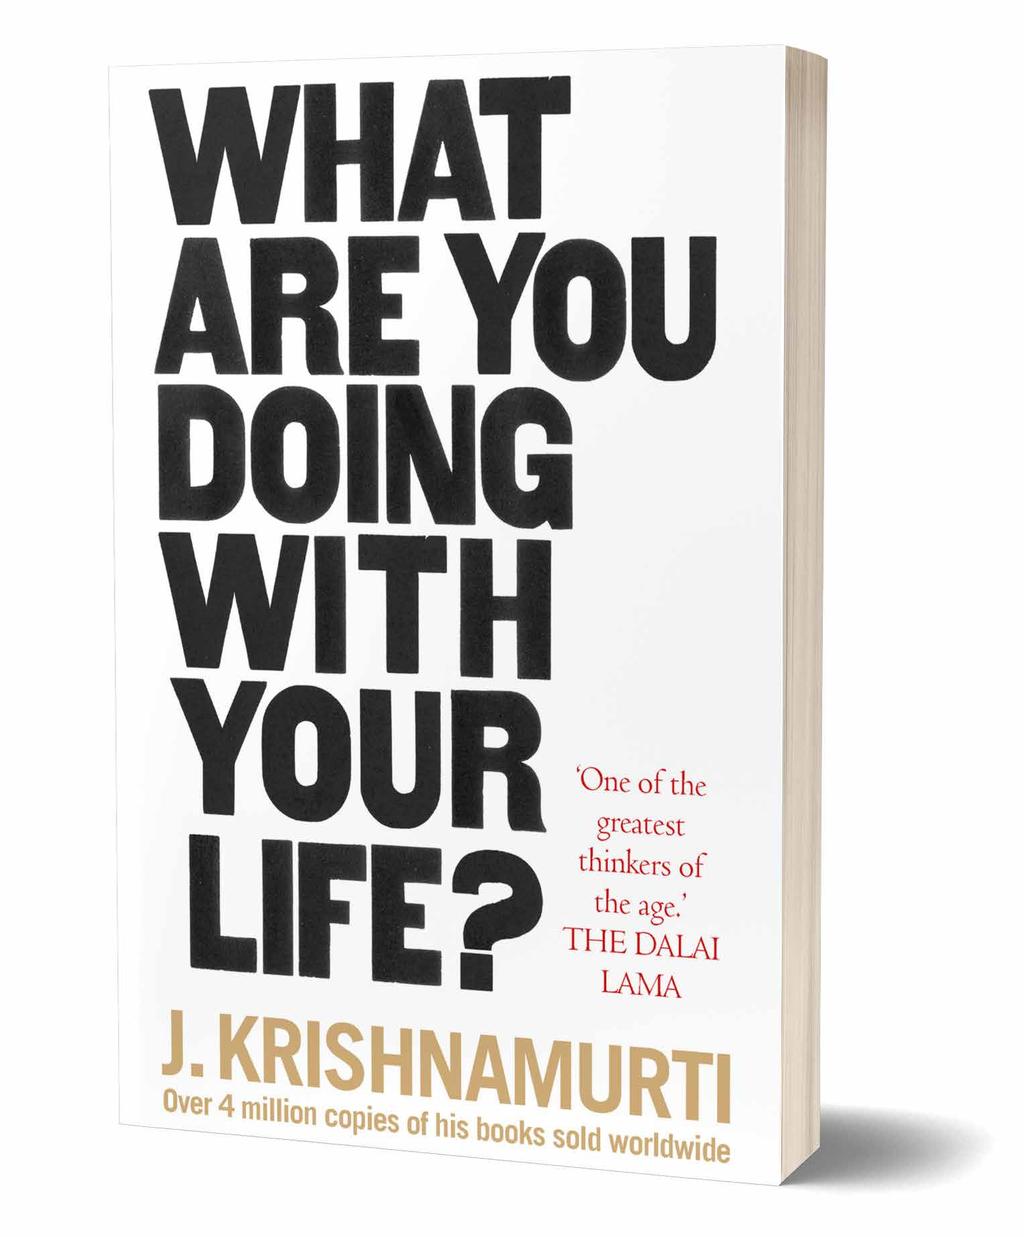 Publications What are you doing with your life? This year What Are You Doing With Your Life? was published by Rider (an imprint of Penguin Random House). It has been incredibly well received.